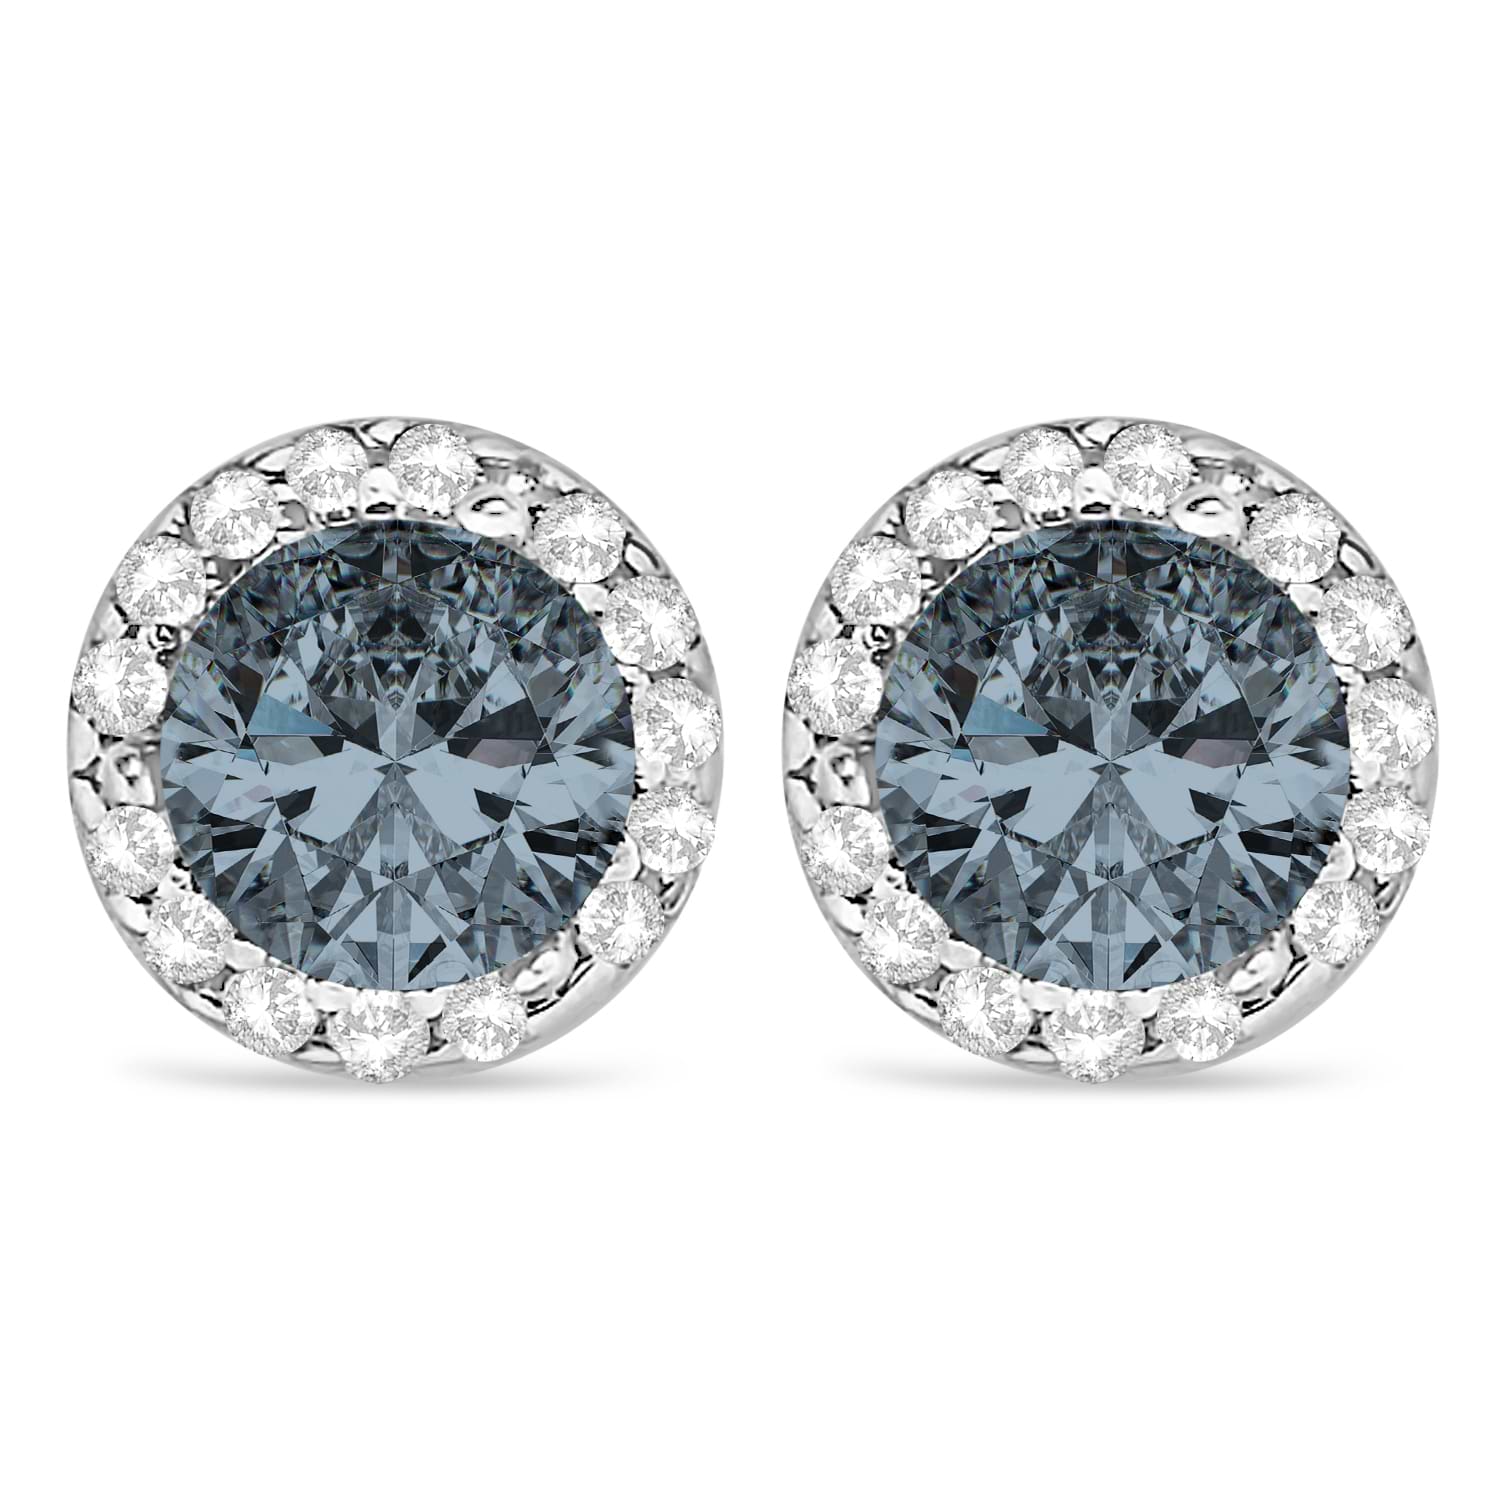 Diamond and Gray Spinel Earrings Halo 14K White Gold (1.15tcw)